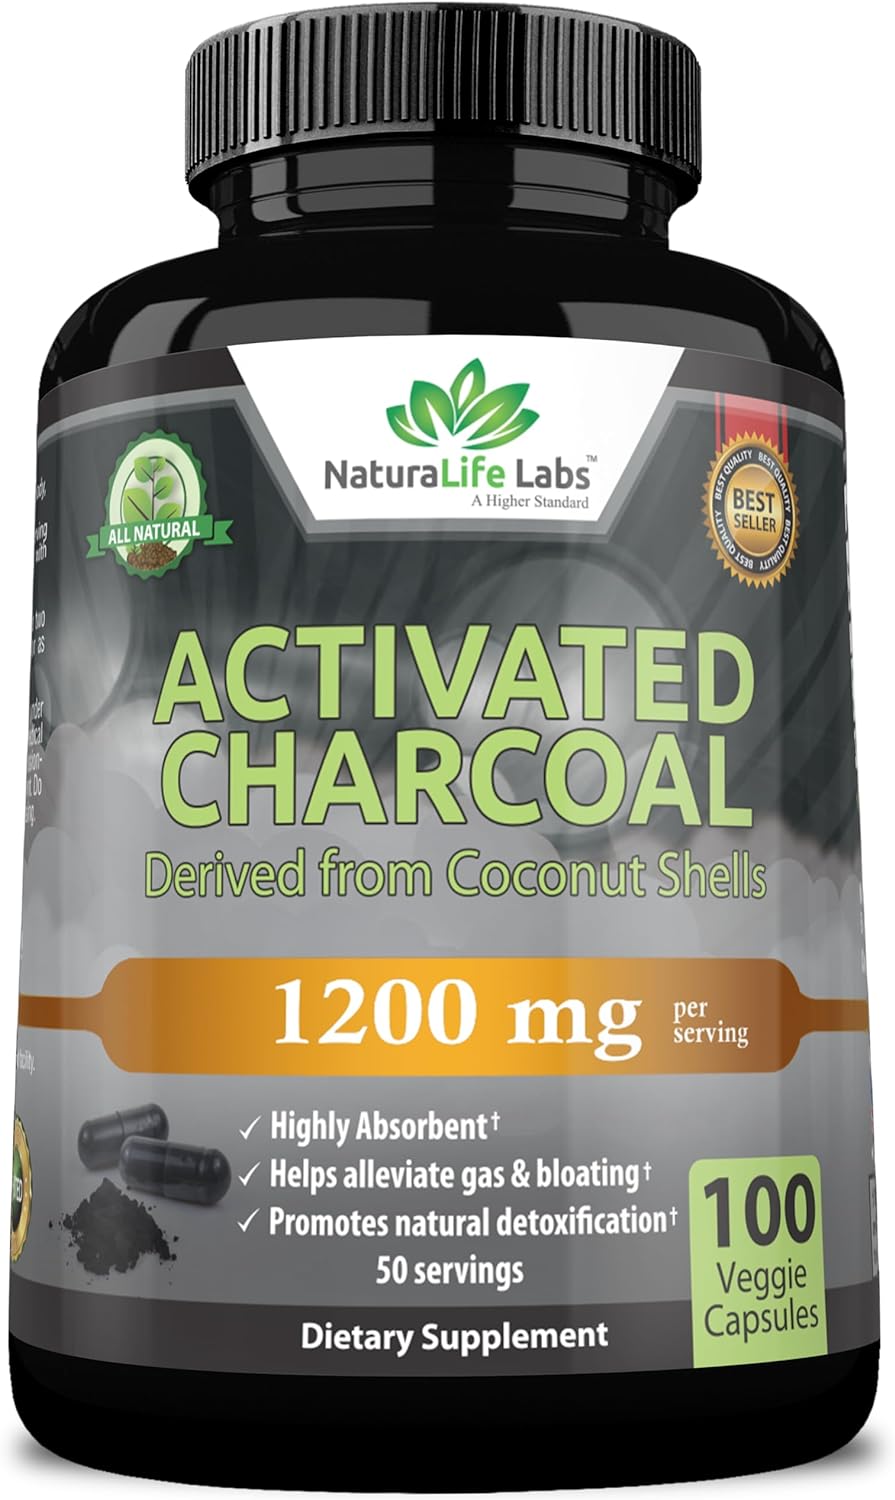 Activated Charcoal Capsules - 1,200 mg Highly Absorbent